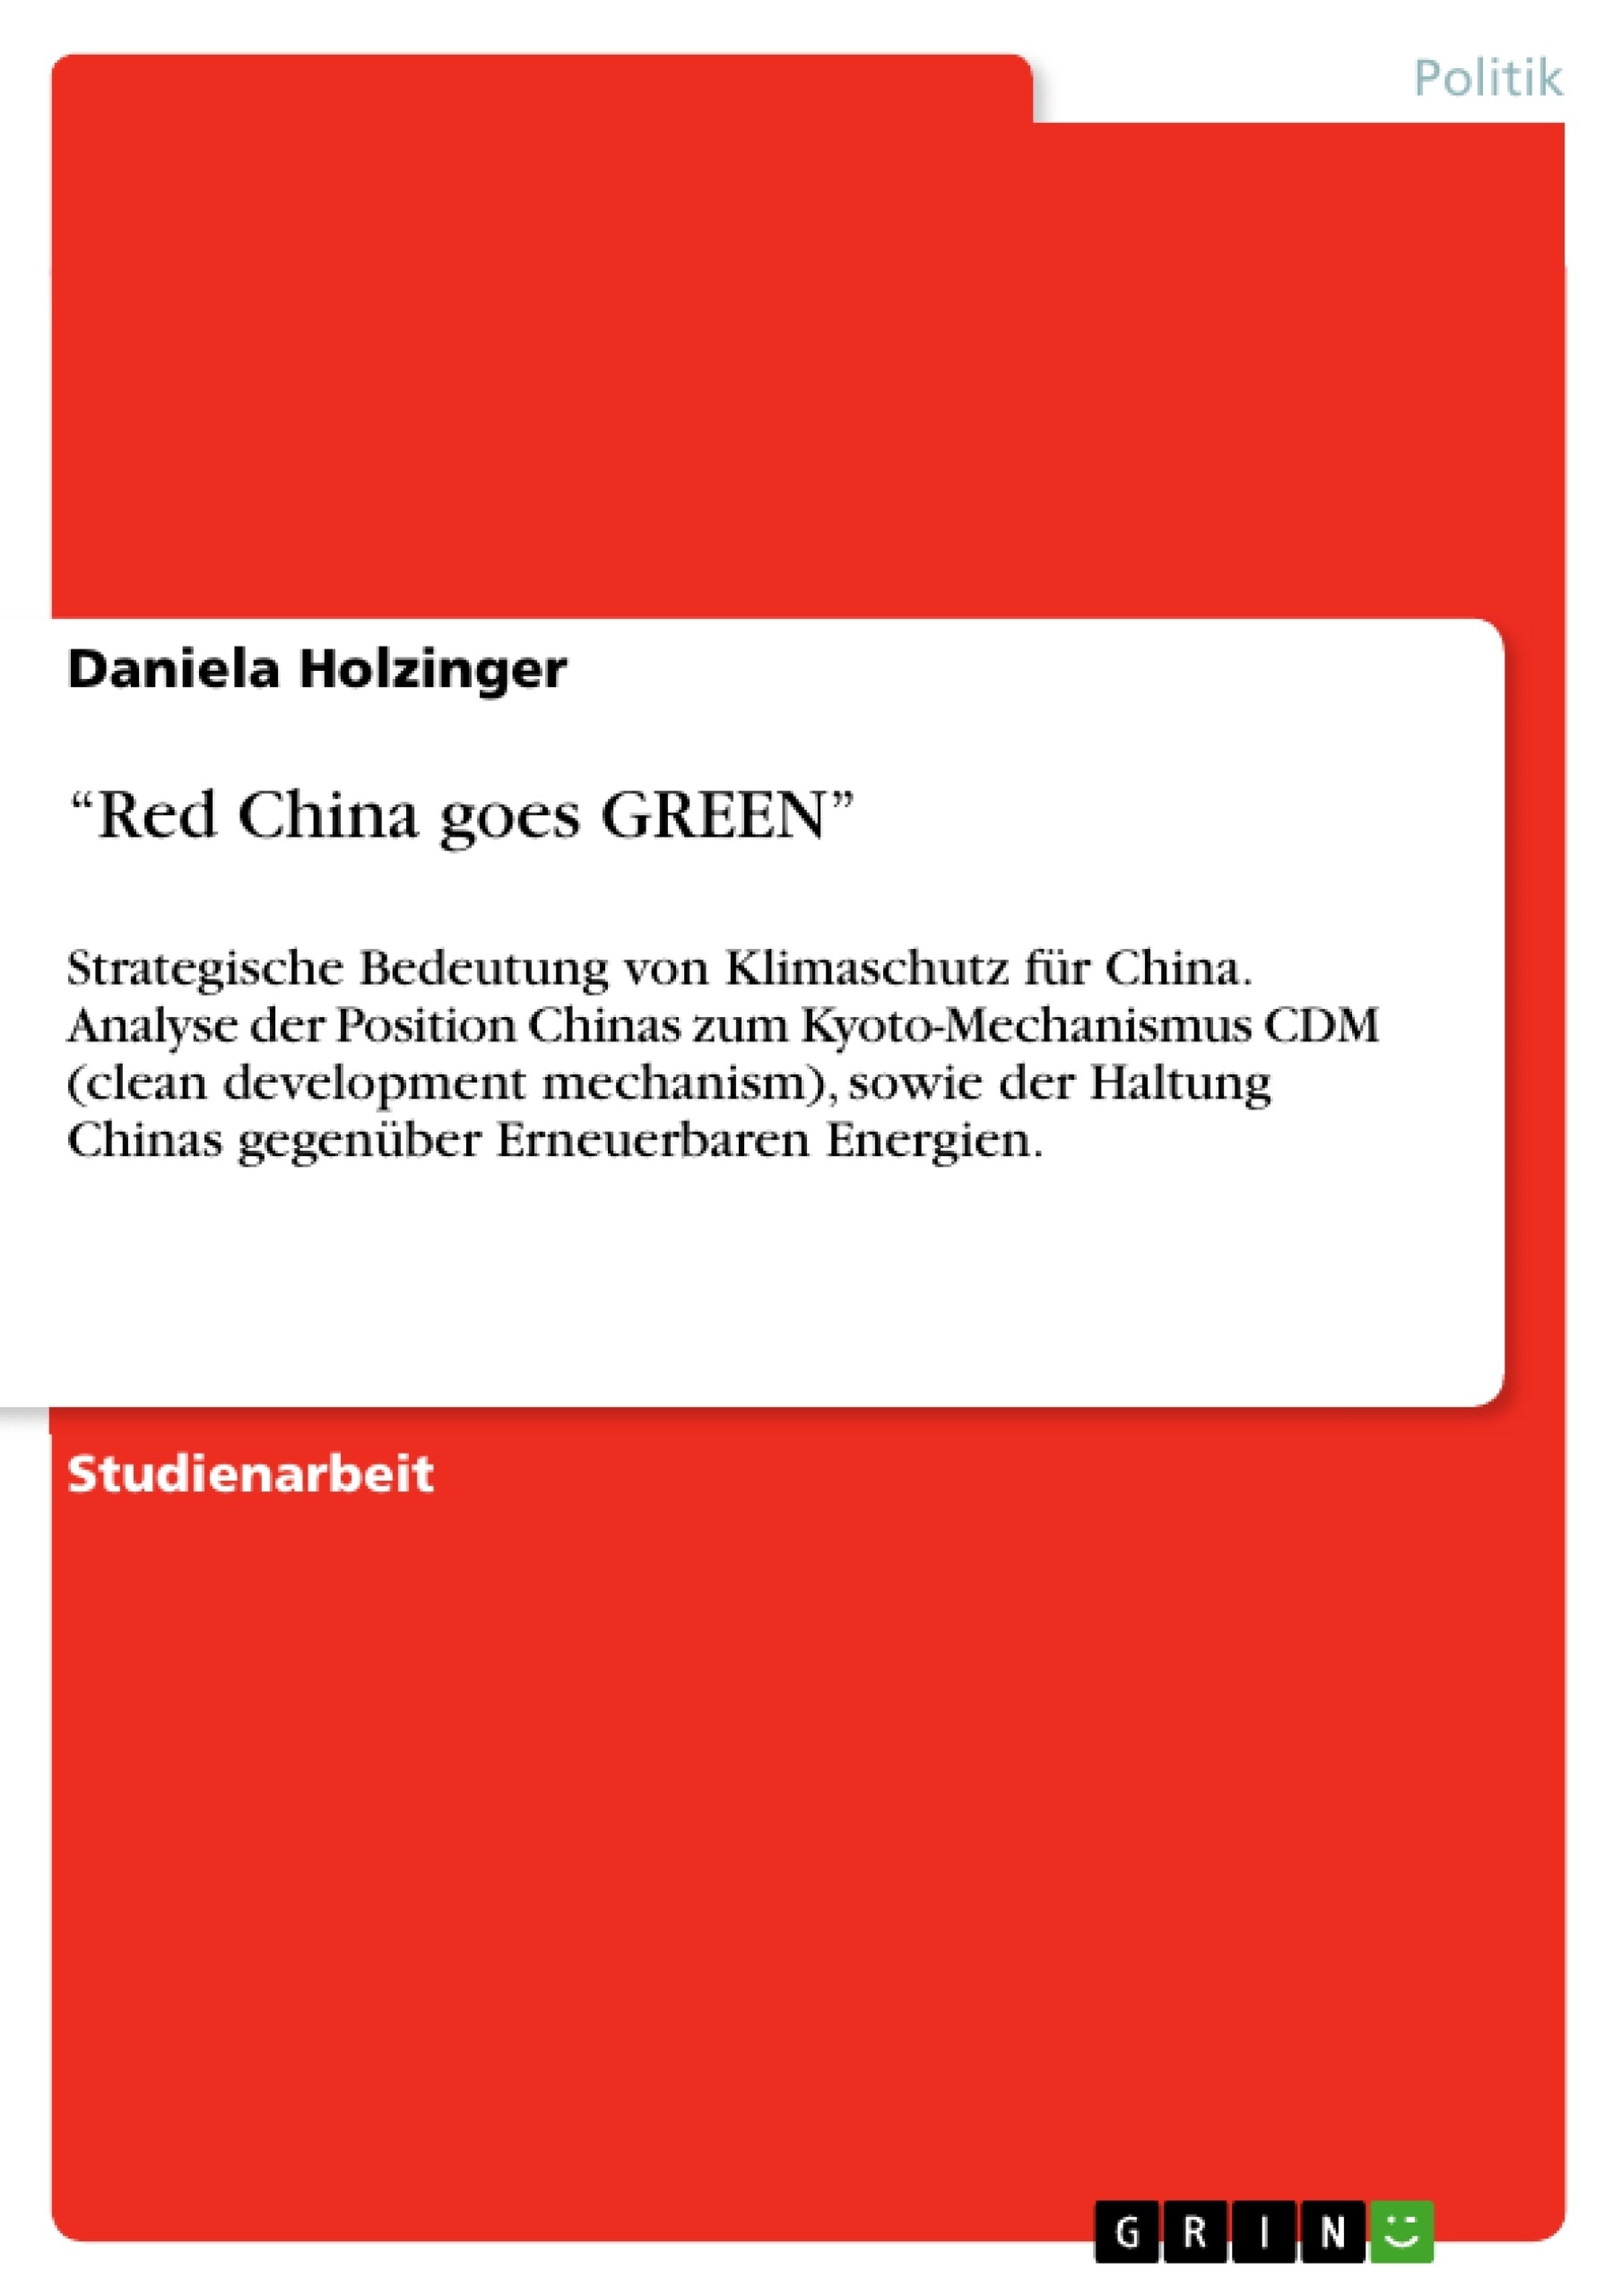 Titel: “Red China goes GREEN”